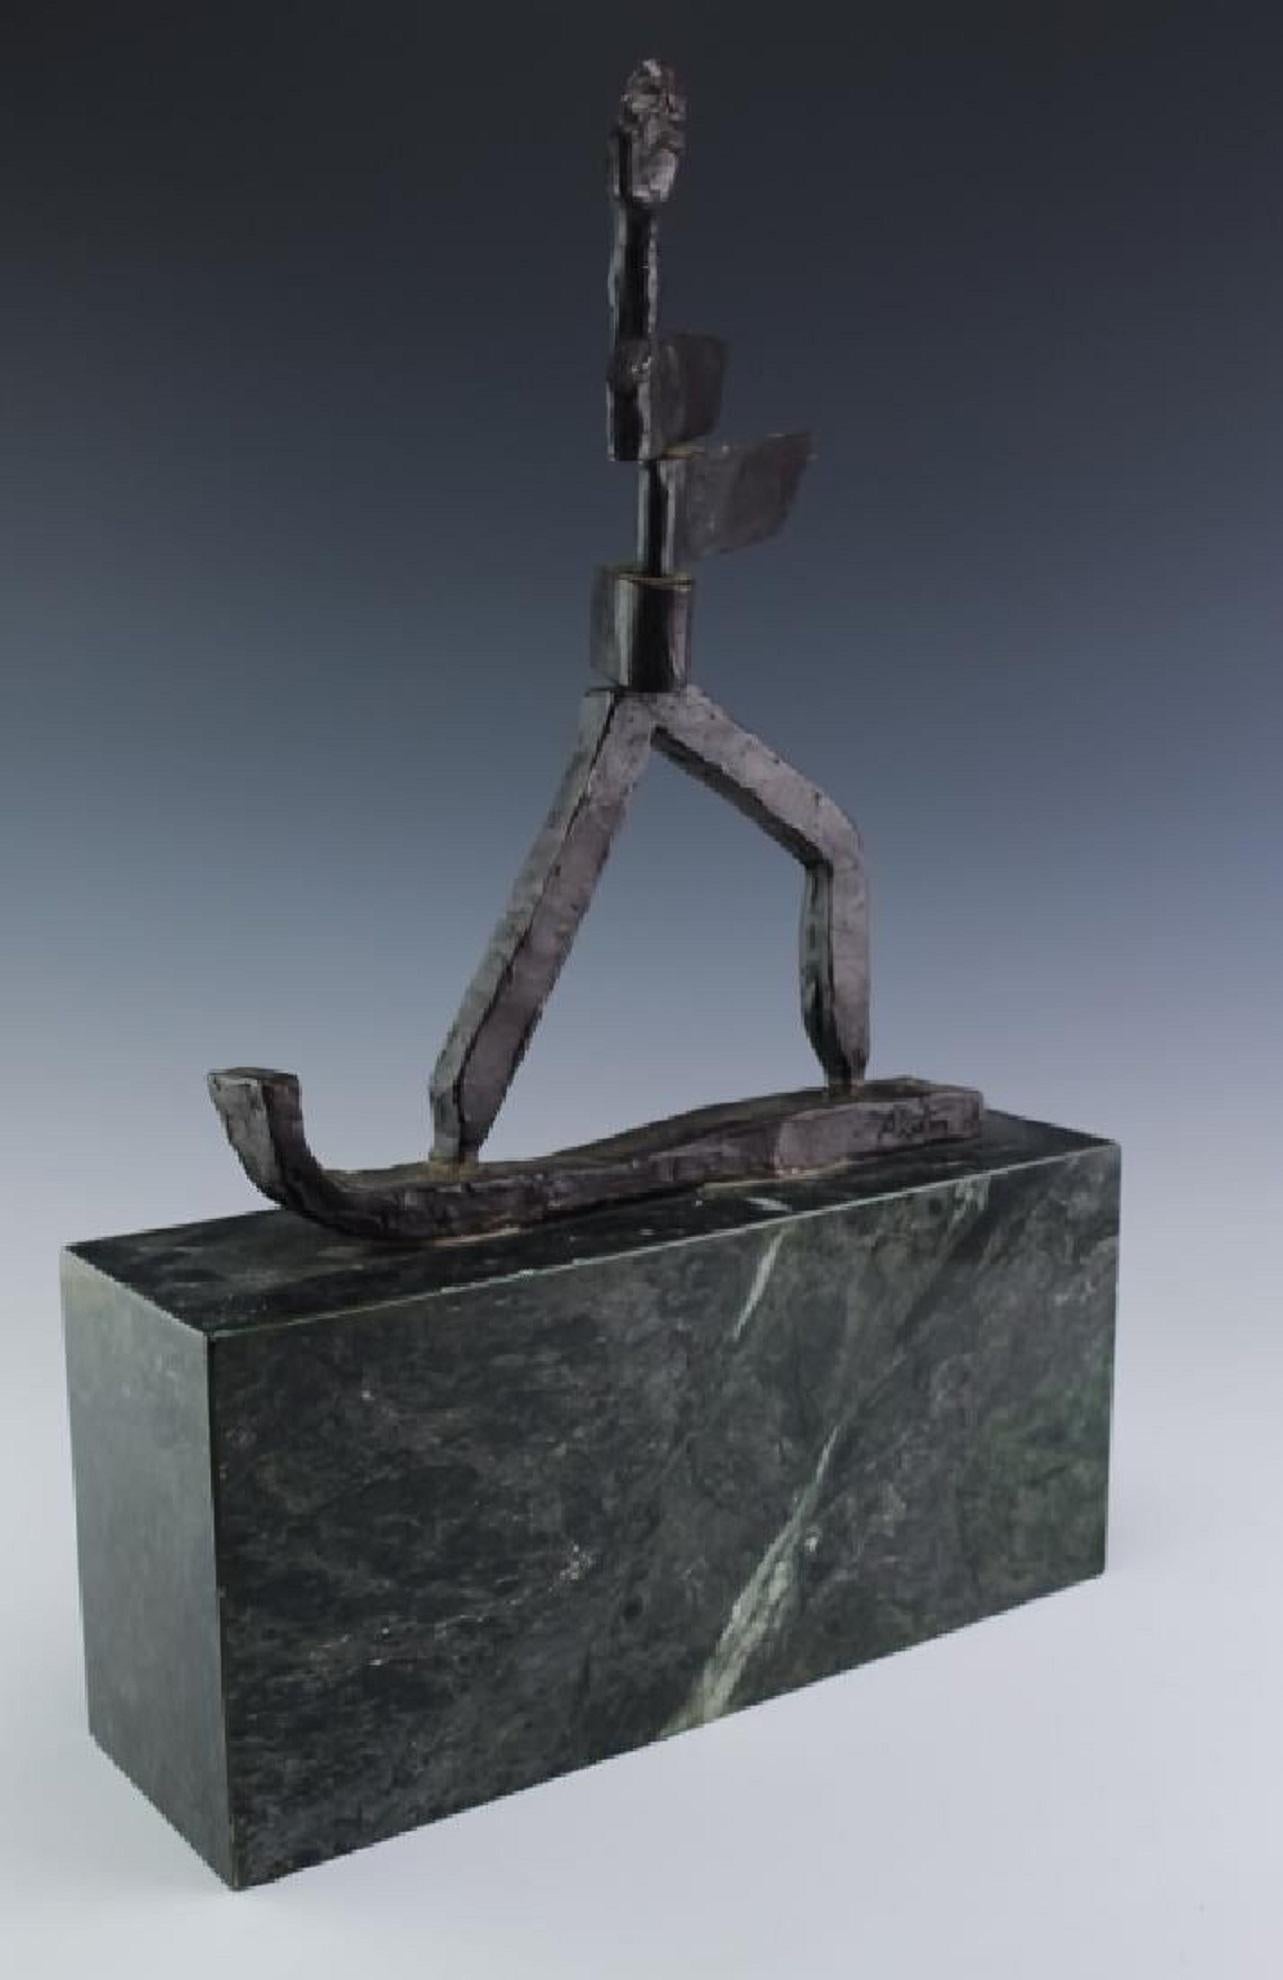 Vintage stylized figural sculpture by J James  Akston (1898-1983 Poland/New York/Florida) Crafted of cast bronze with a rich dark brown patina. A sports figure, depicting a snow skiing or water surfing figure in a Mid Century Modern Brutalist style.